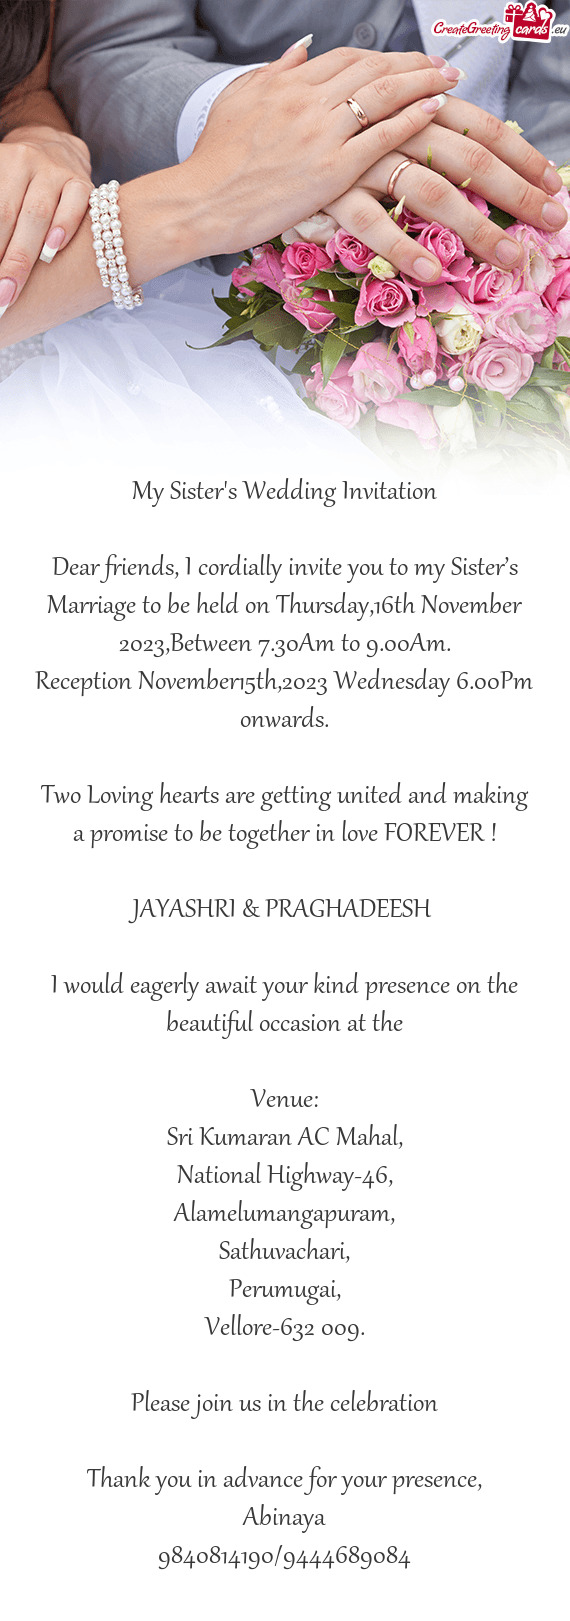 Dear friends, I cordially invite you to my Sister’s Marriage to be held on Thursday,16th November